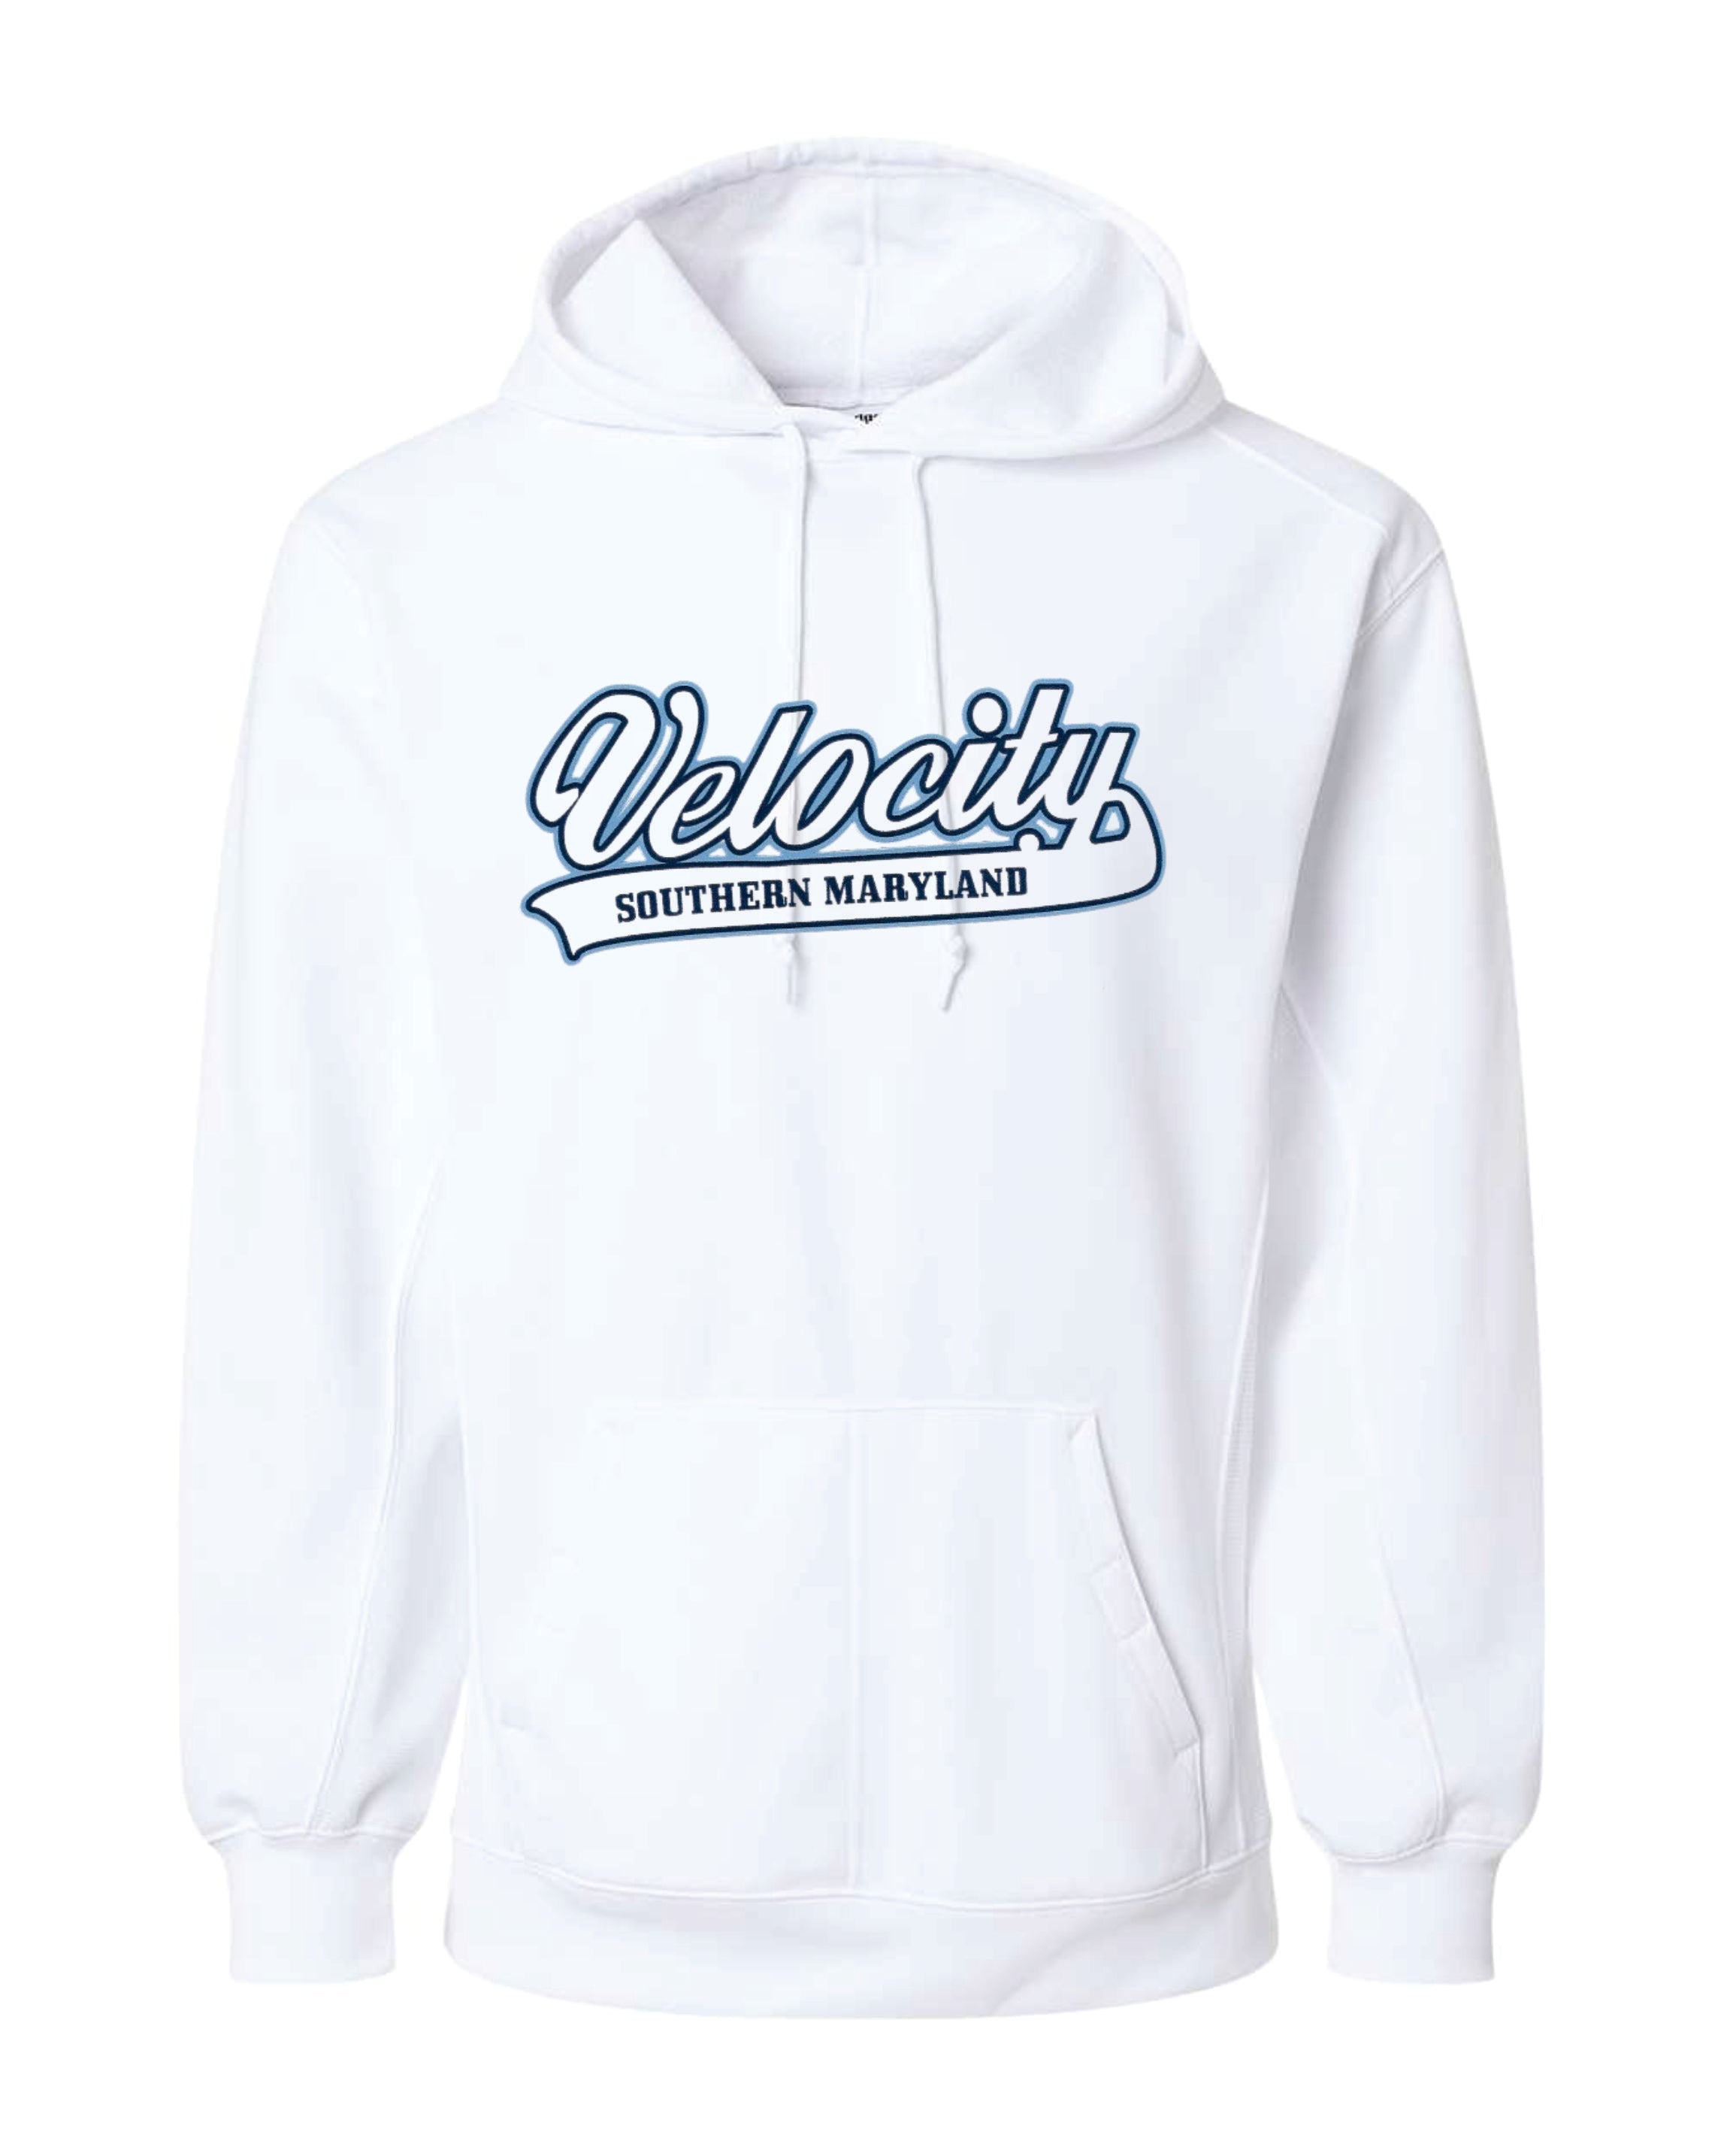 Velocity Badger Dri-fit Hoodie-YOUTH